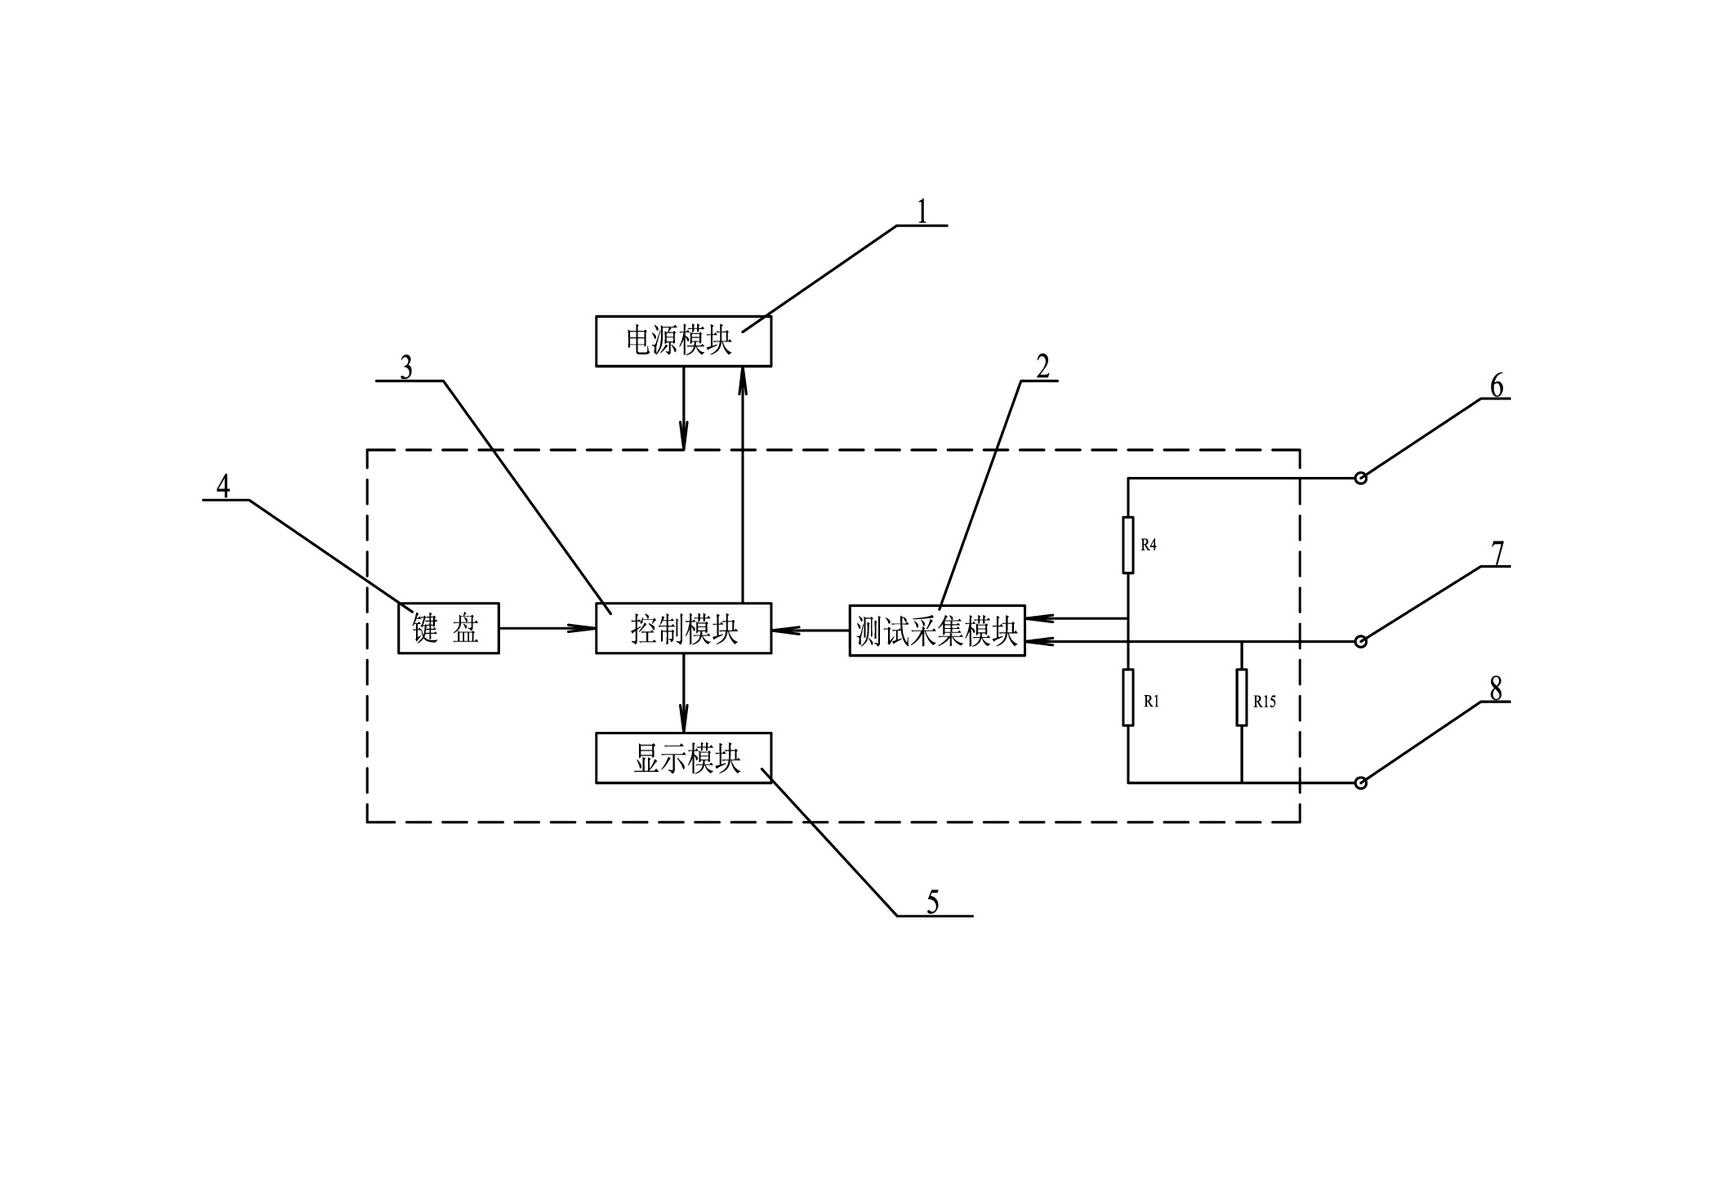 Measuring device for measuring capacitance in parallel capacitor bank